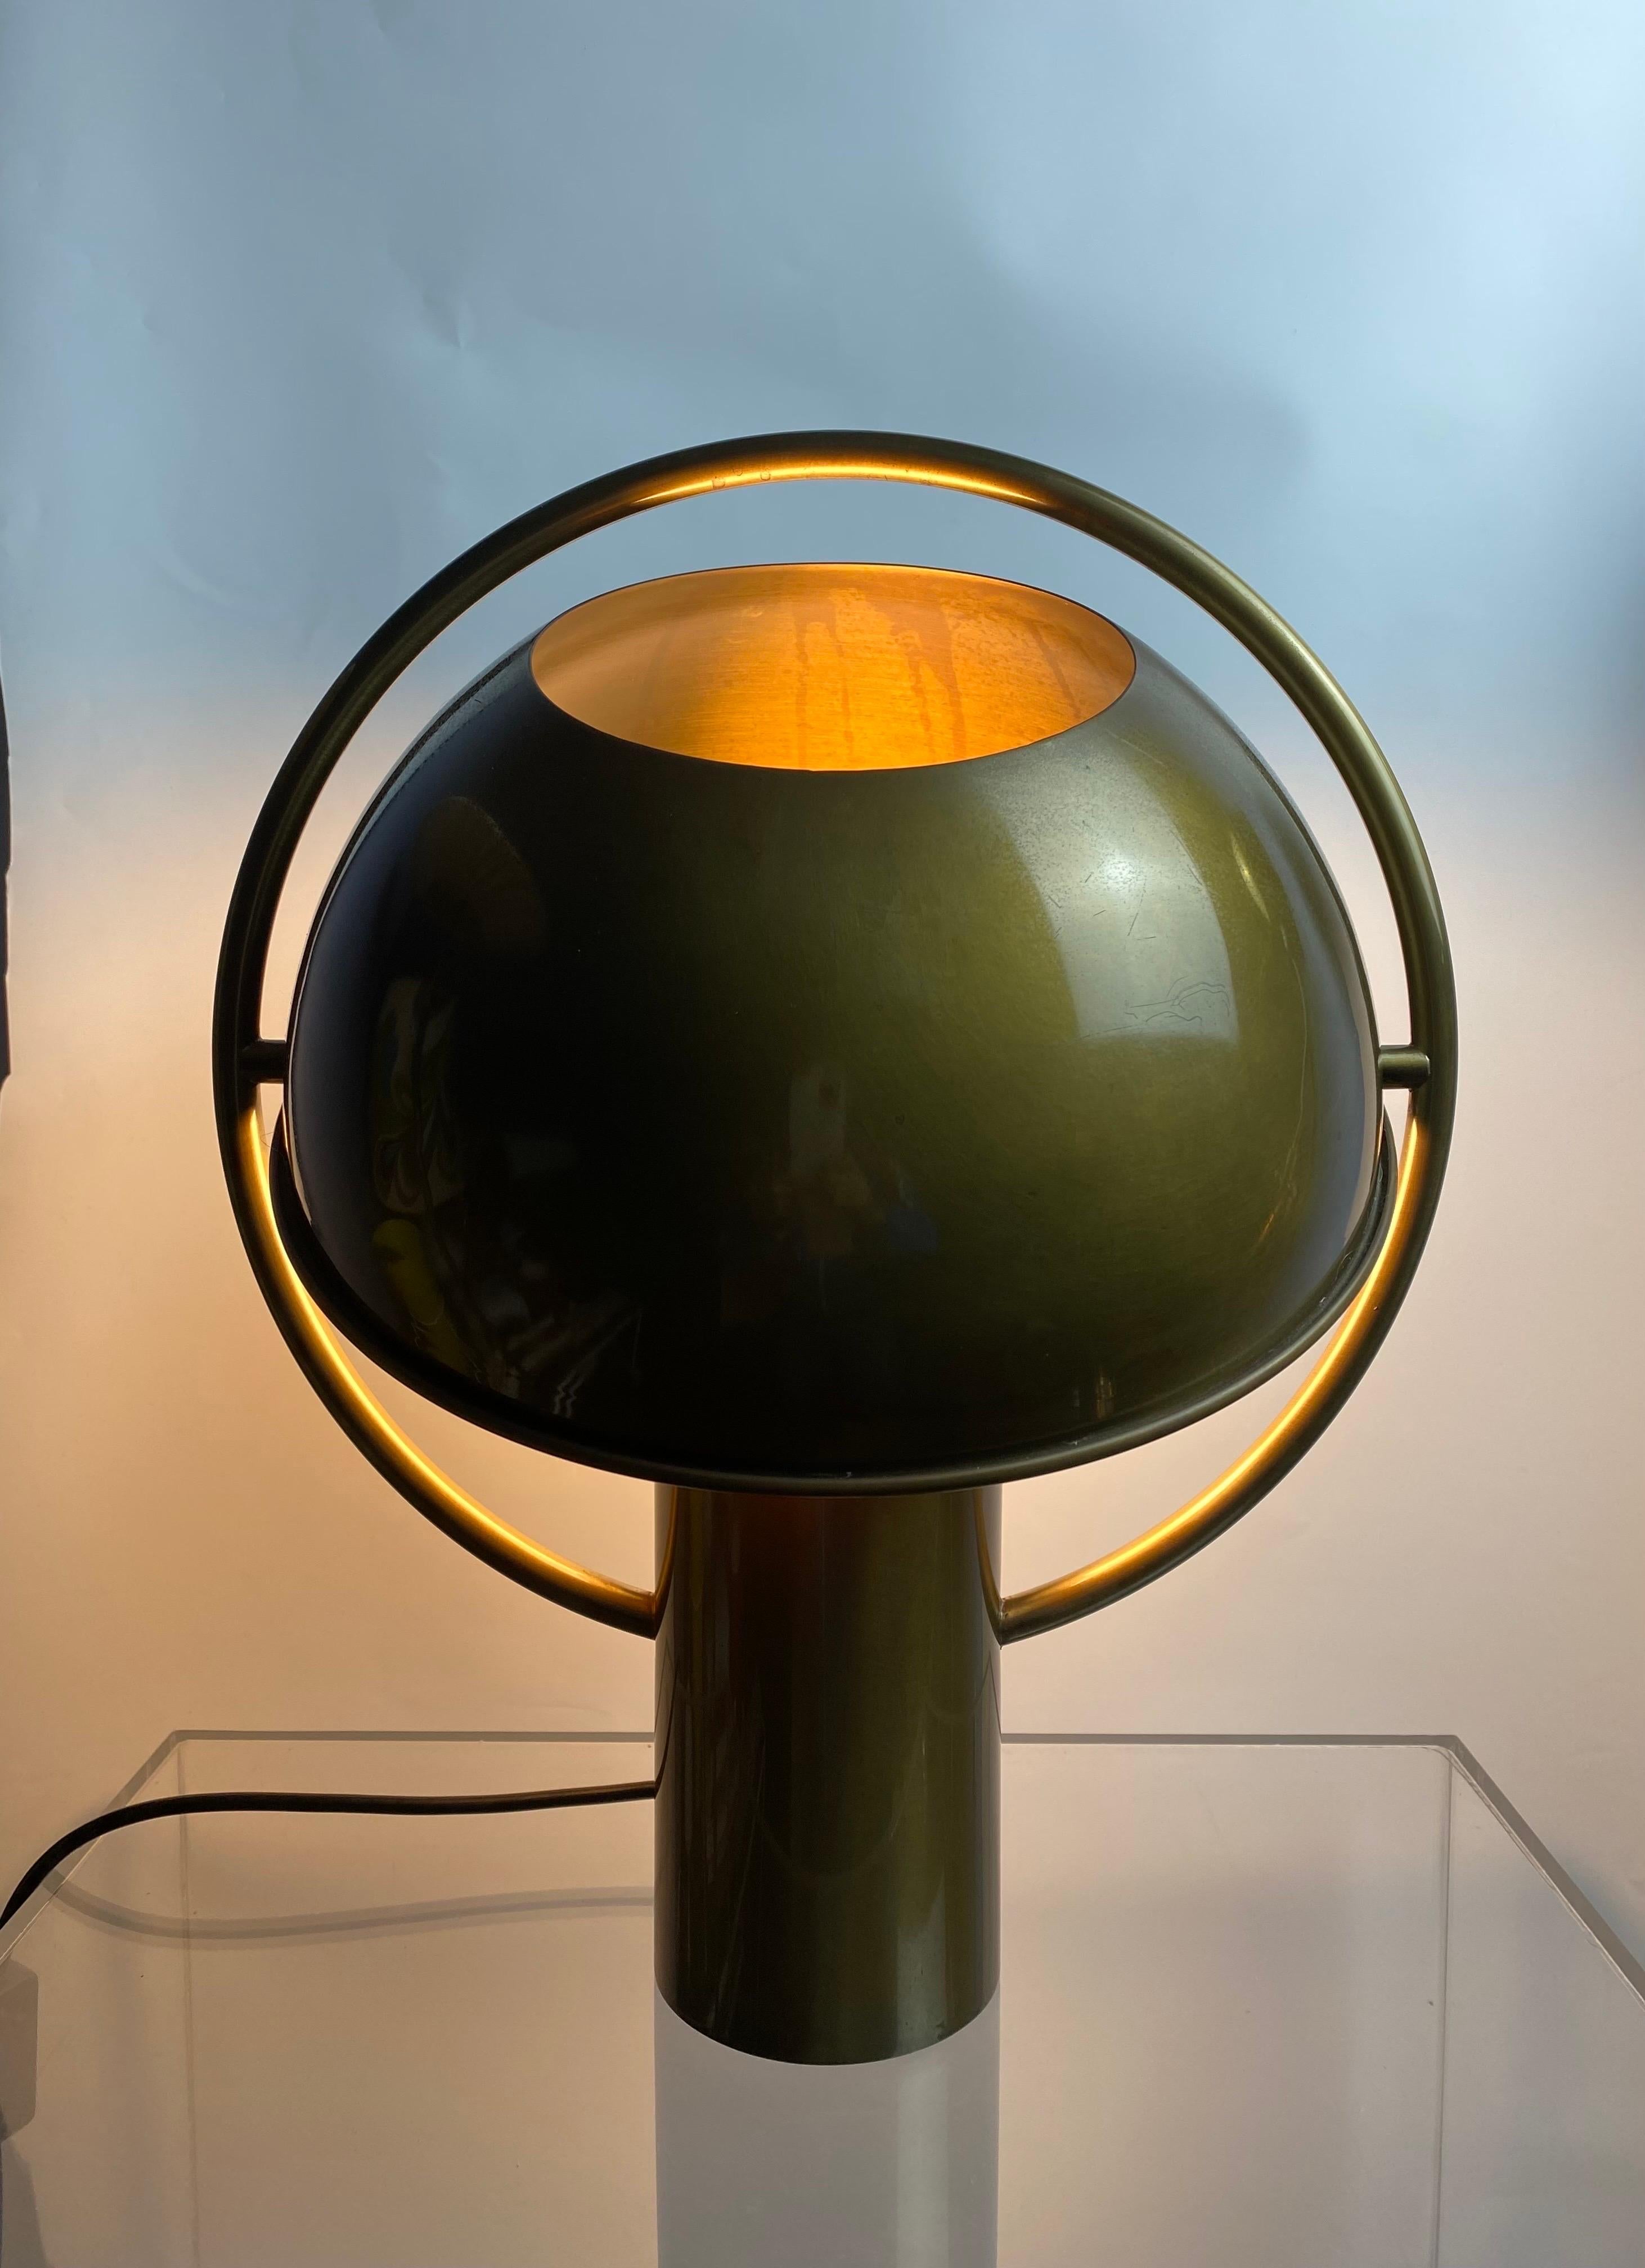 Lacquered Rare German Midcentury Table Lamp in Solid Brass by Günter&Florian Schulz 1970s For Sale